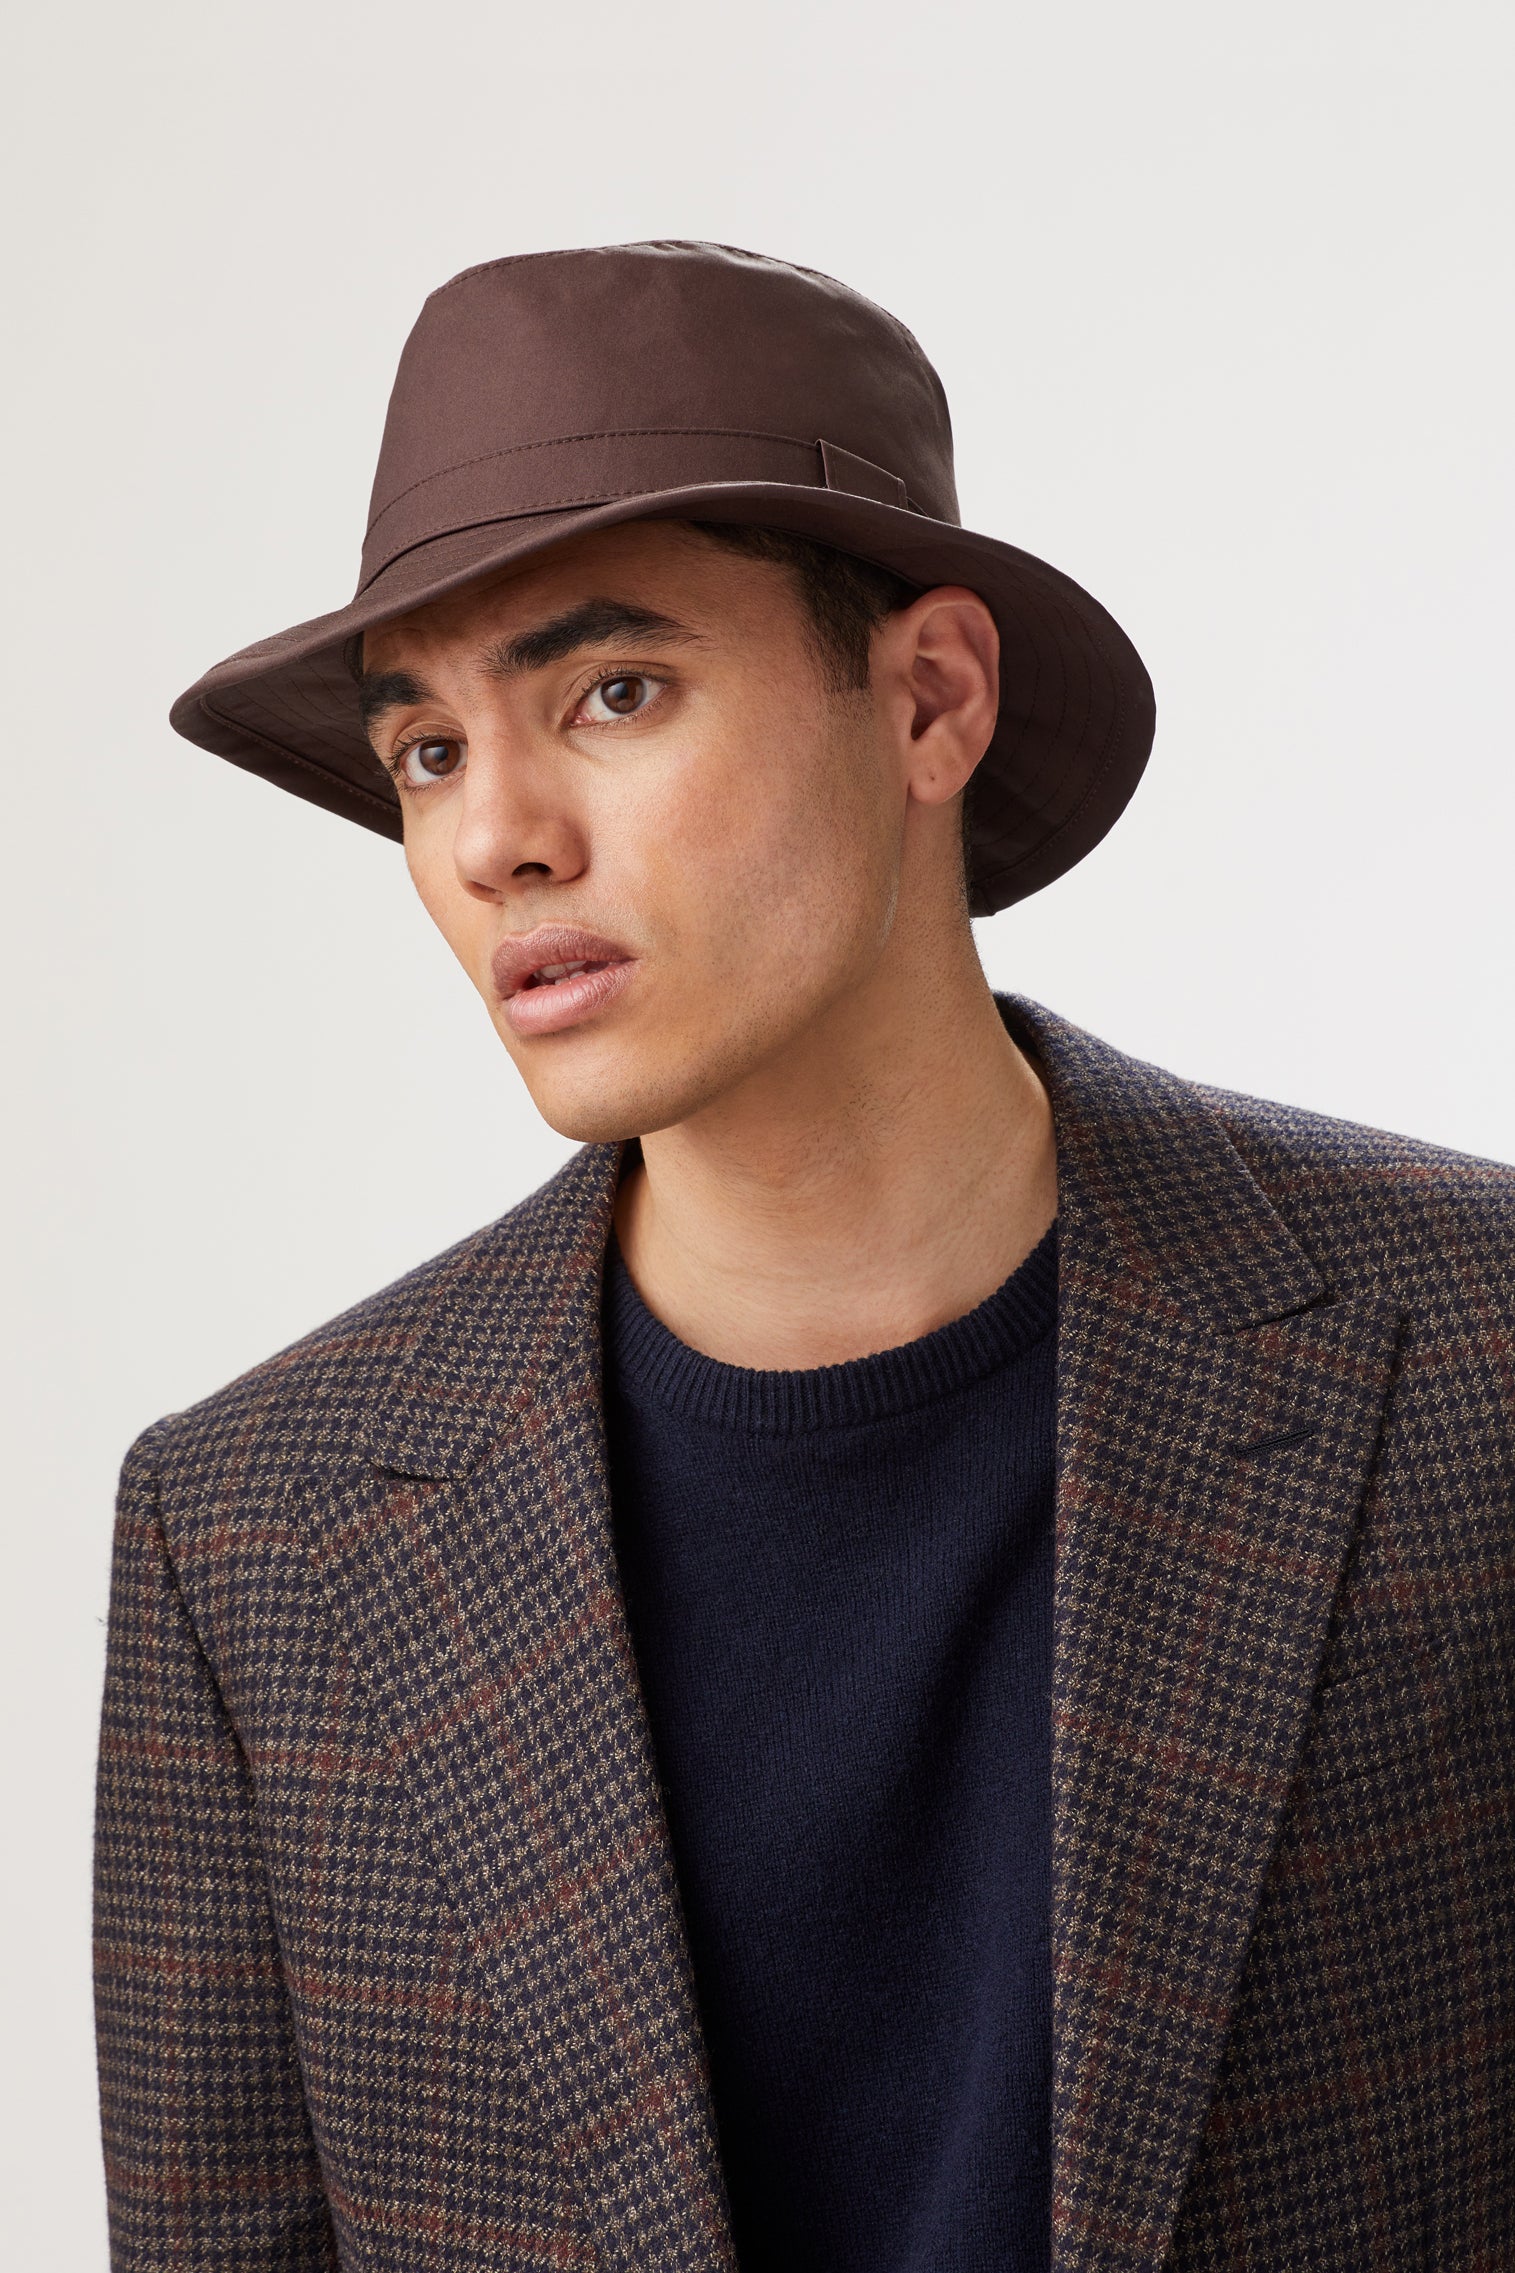 Tay GORE-TEX Hat - Hats for Square Face Shapes - Lock & Co. Hatters London UK